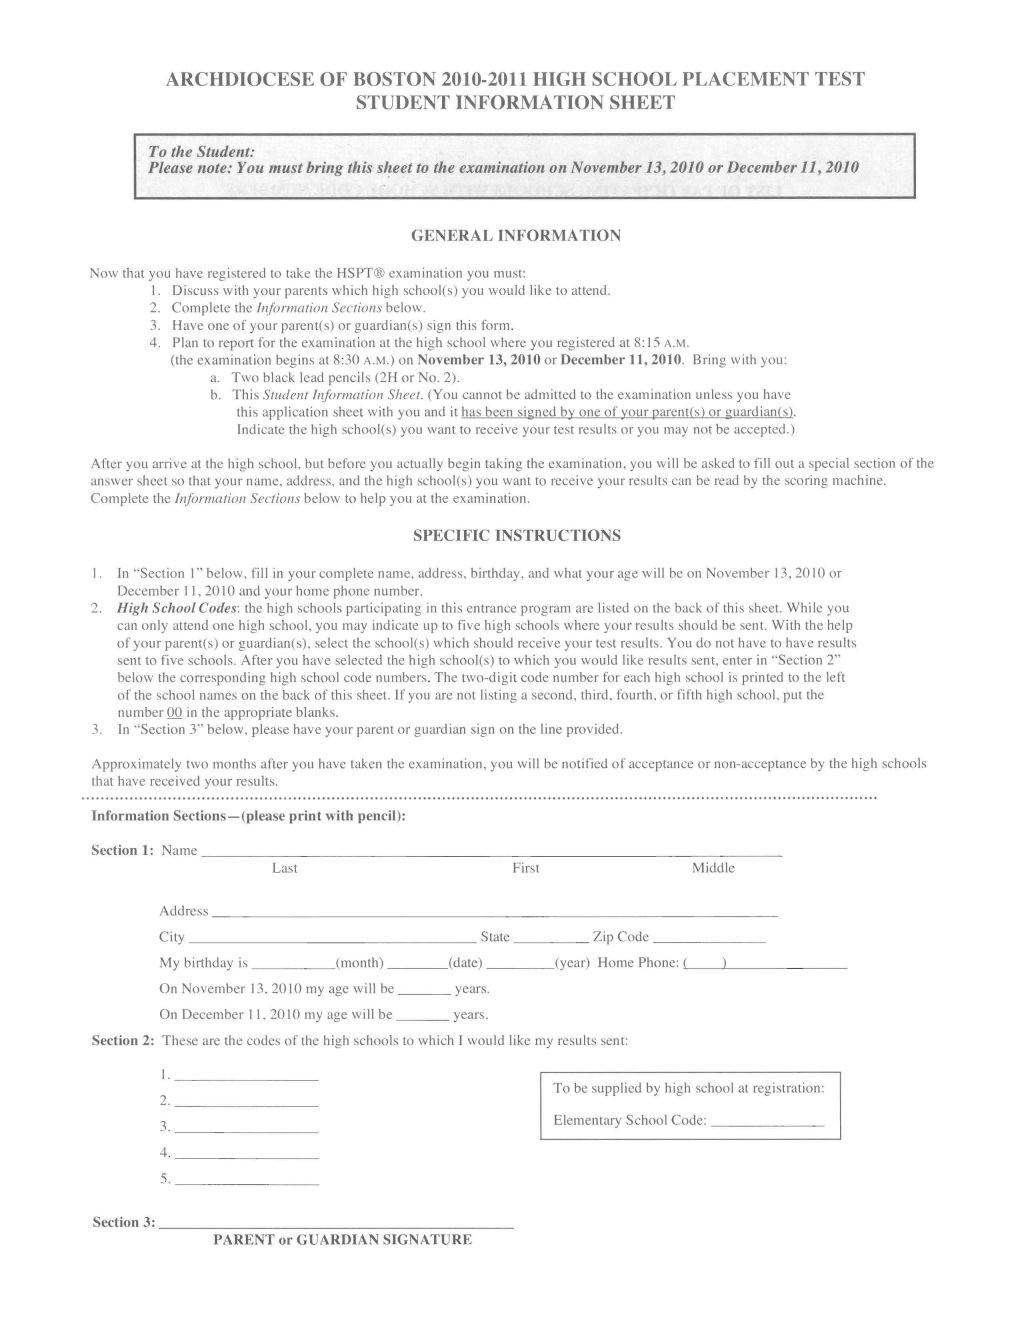 Archdiocese of Boston 2010-2011 High School Placement Test Student Information Sheet